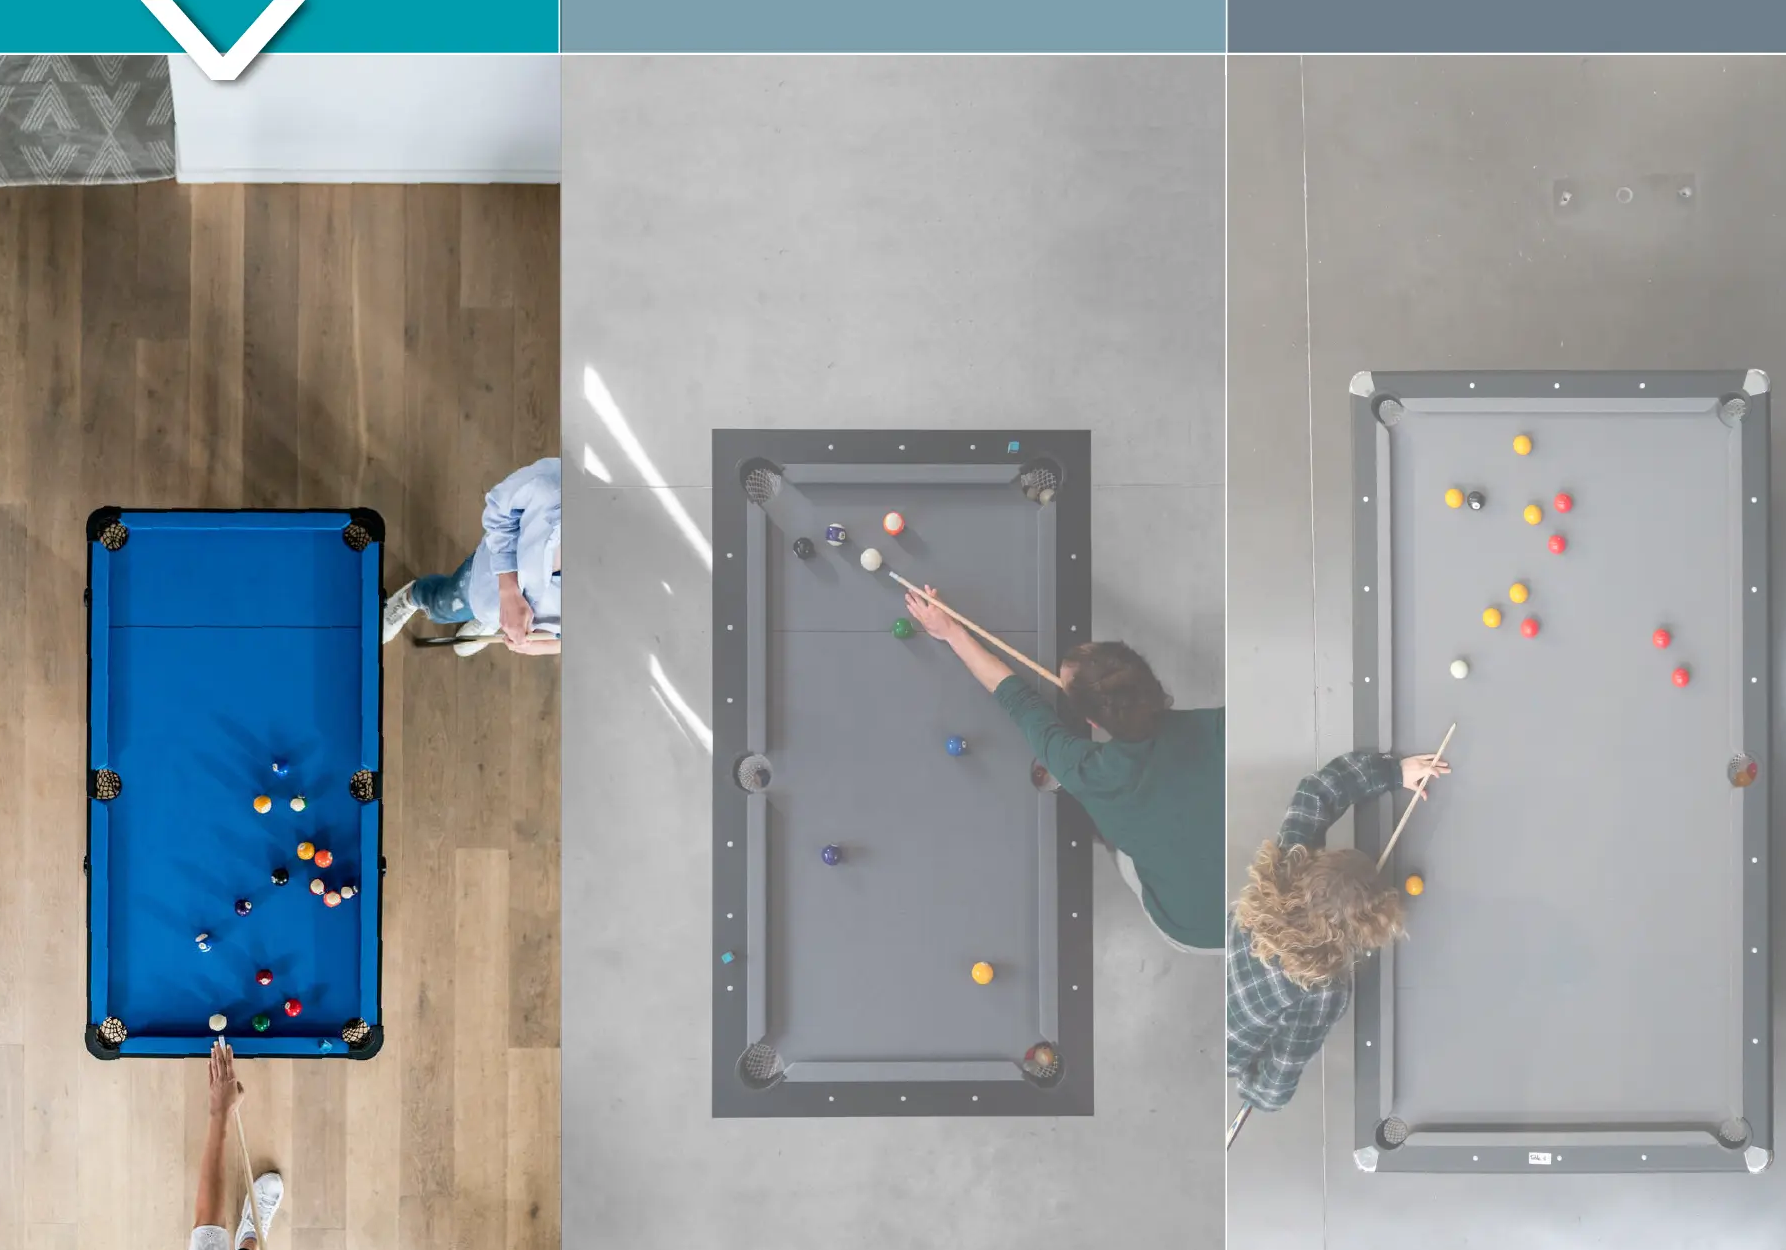 Decathlon pool table dimensions: space needed